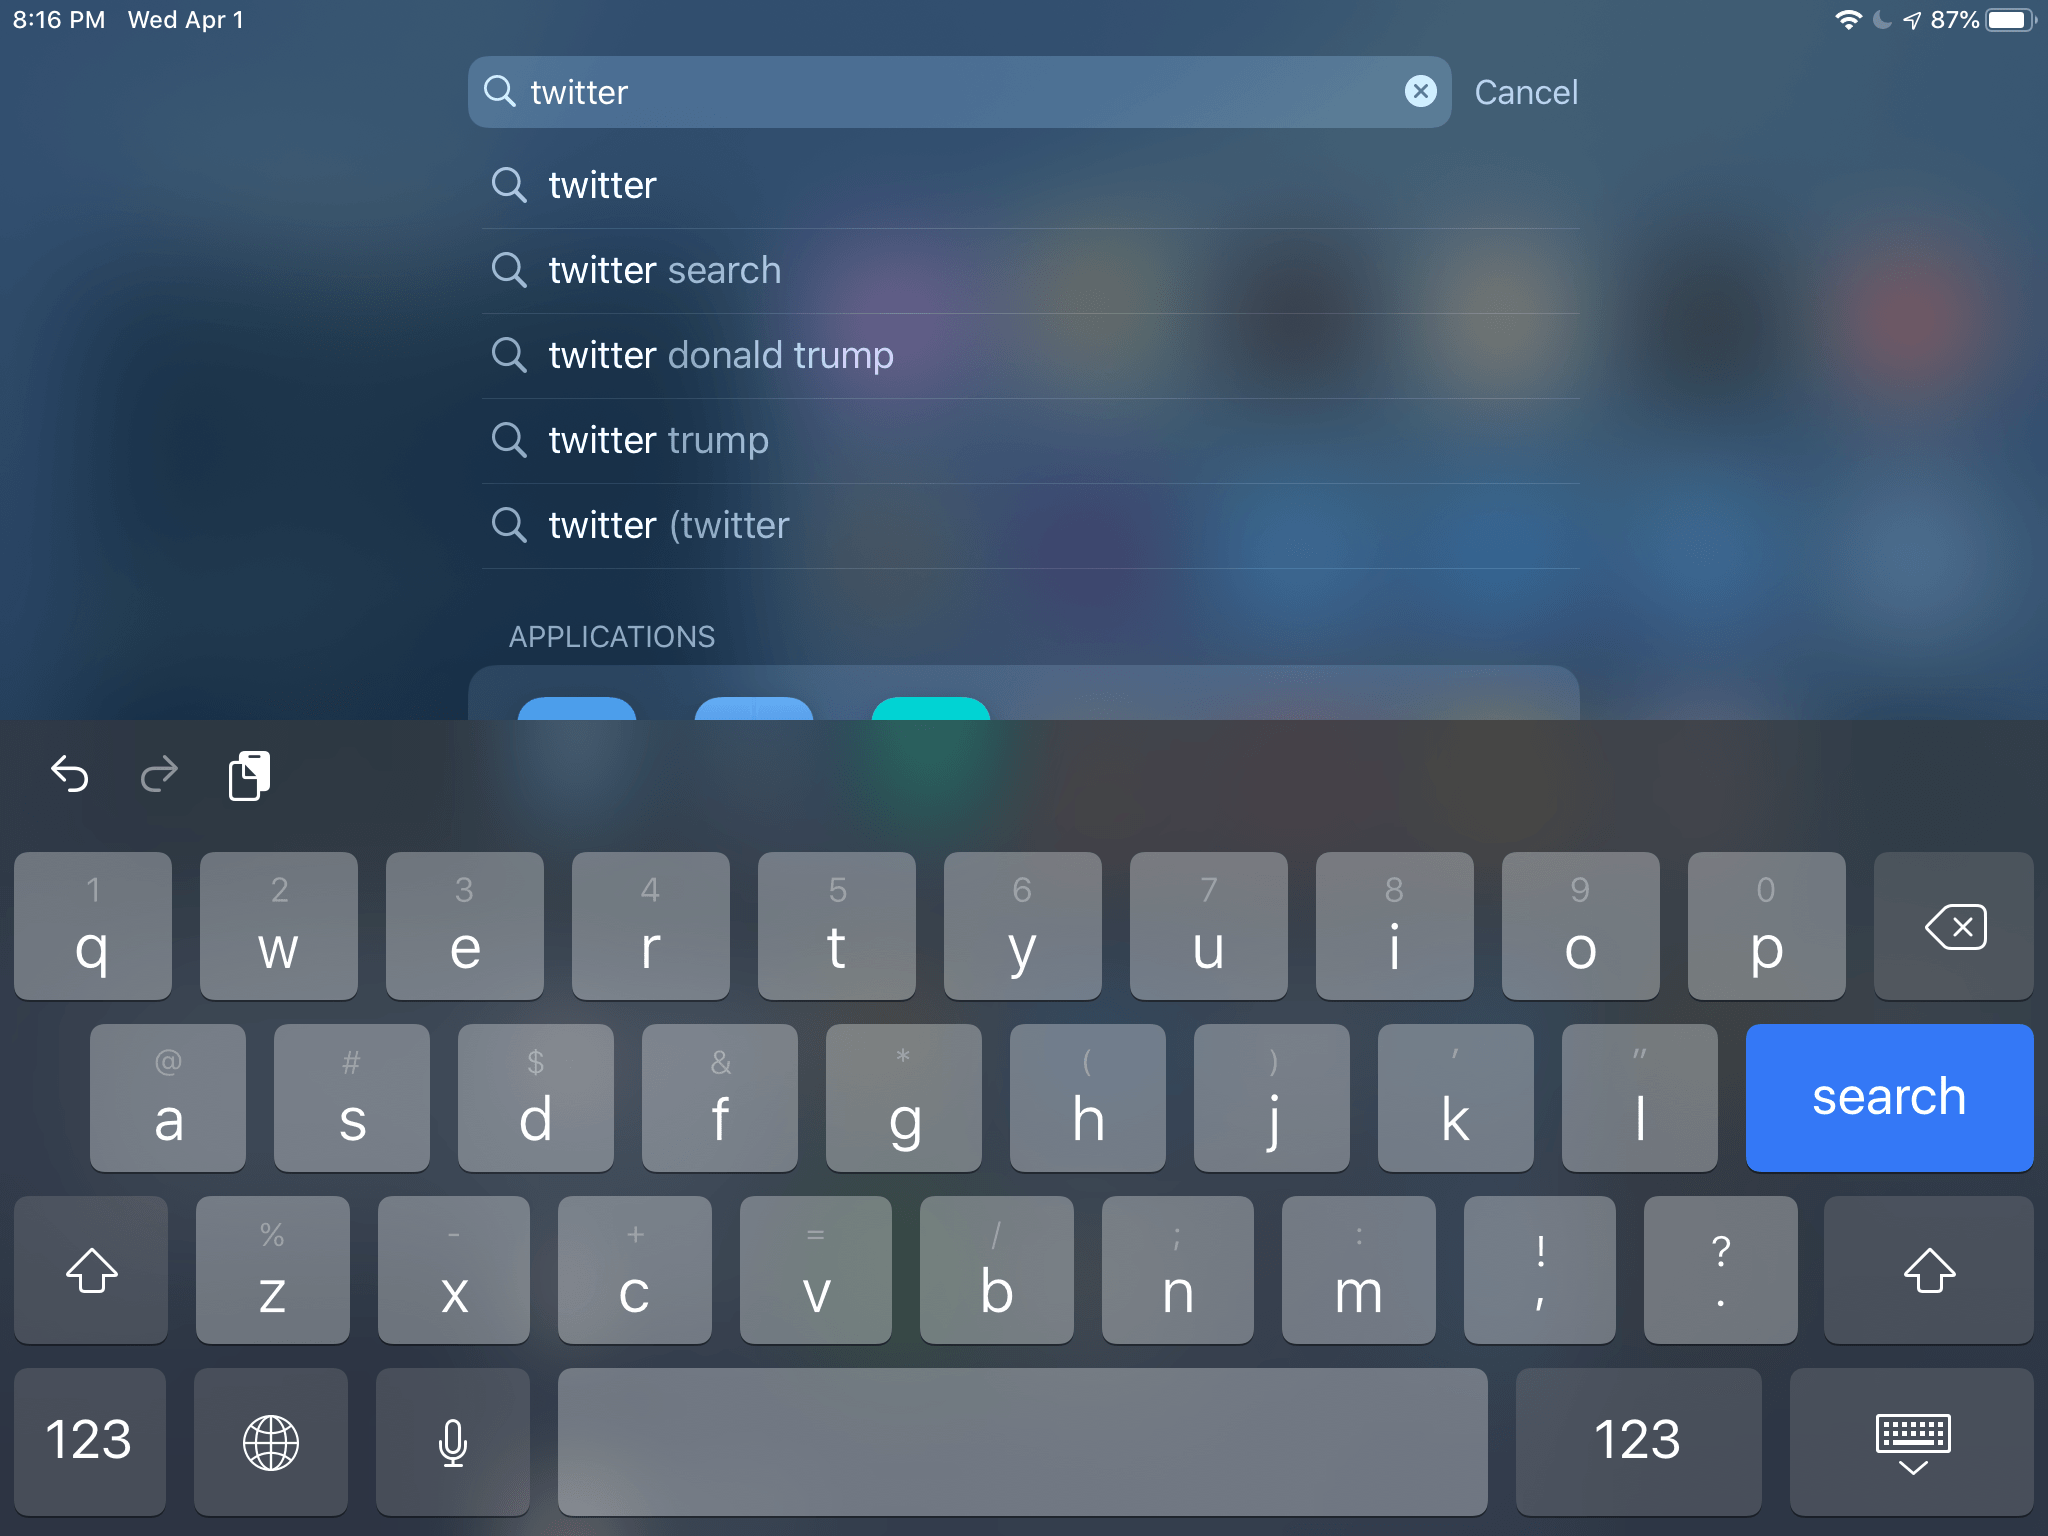 Searching for an app using the software keyboard in landscape mode is problematic on the mini.